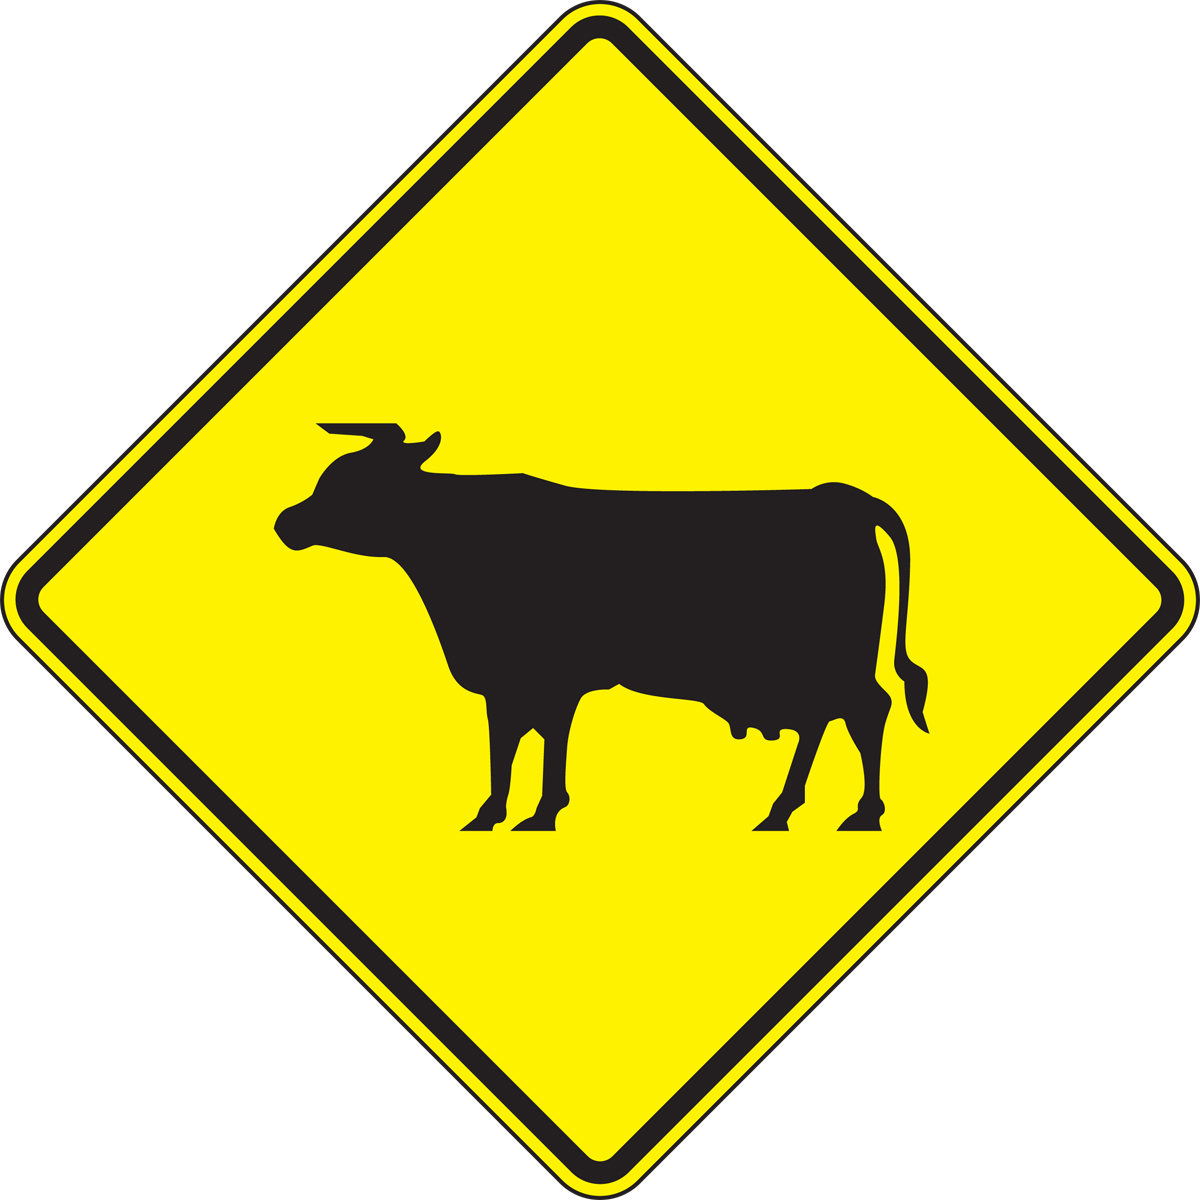 Cattle Crossing Novelty Sign Vinyl Sticker Decal 8 